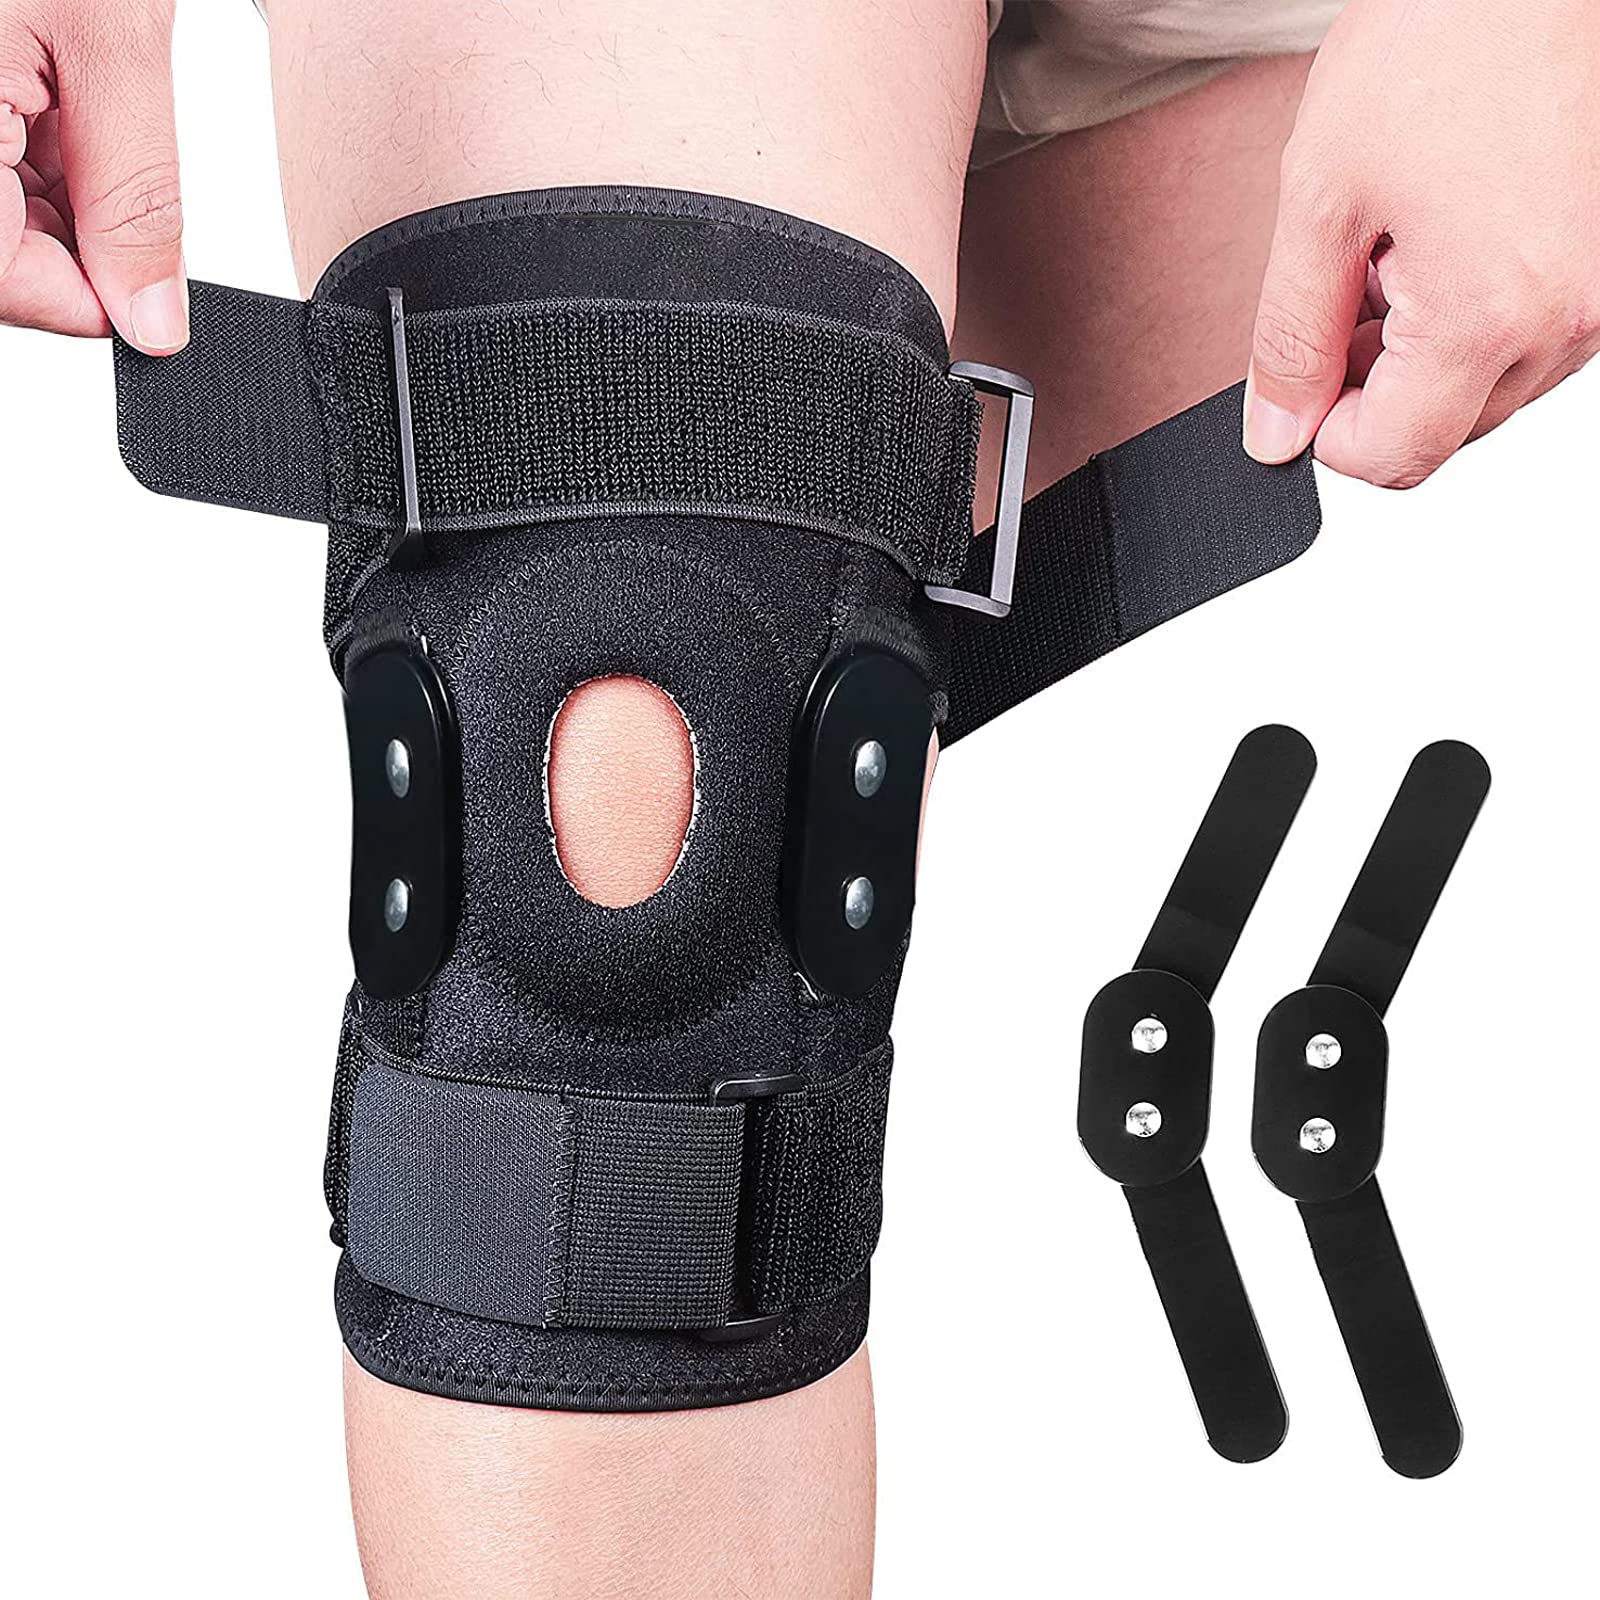 Hinged Knee Brace - Relieves ACL, MCL, Meniscus Tear, Arthritis, Tendon  Pain - O